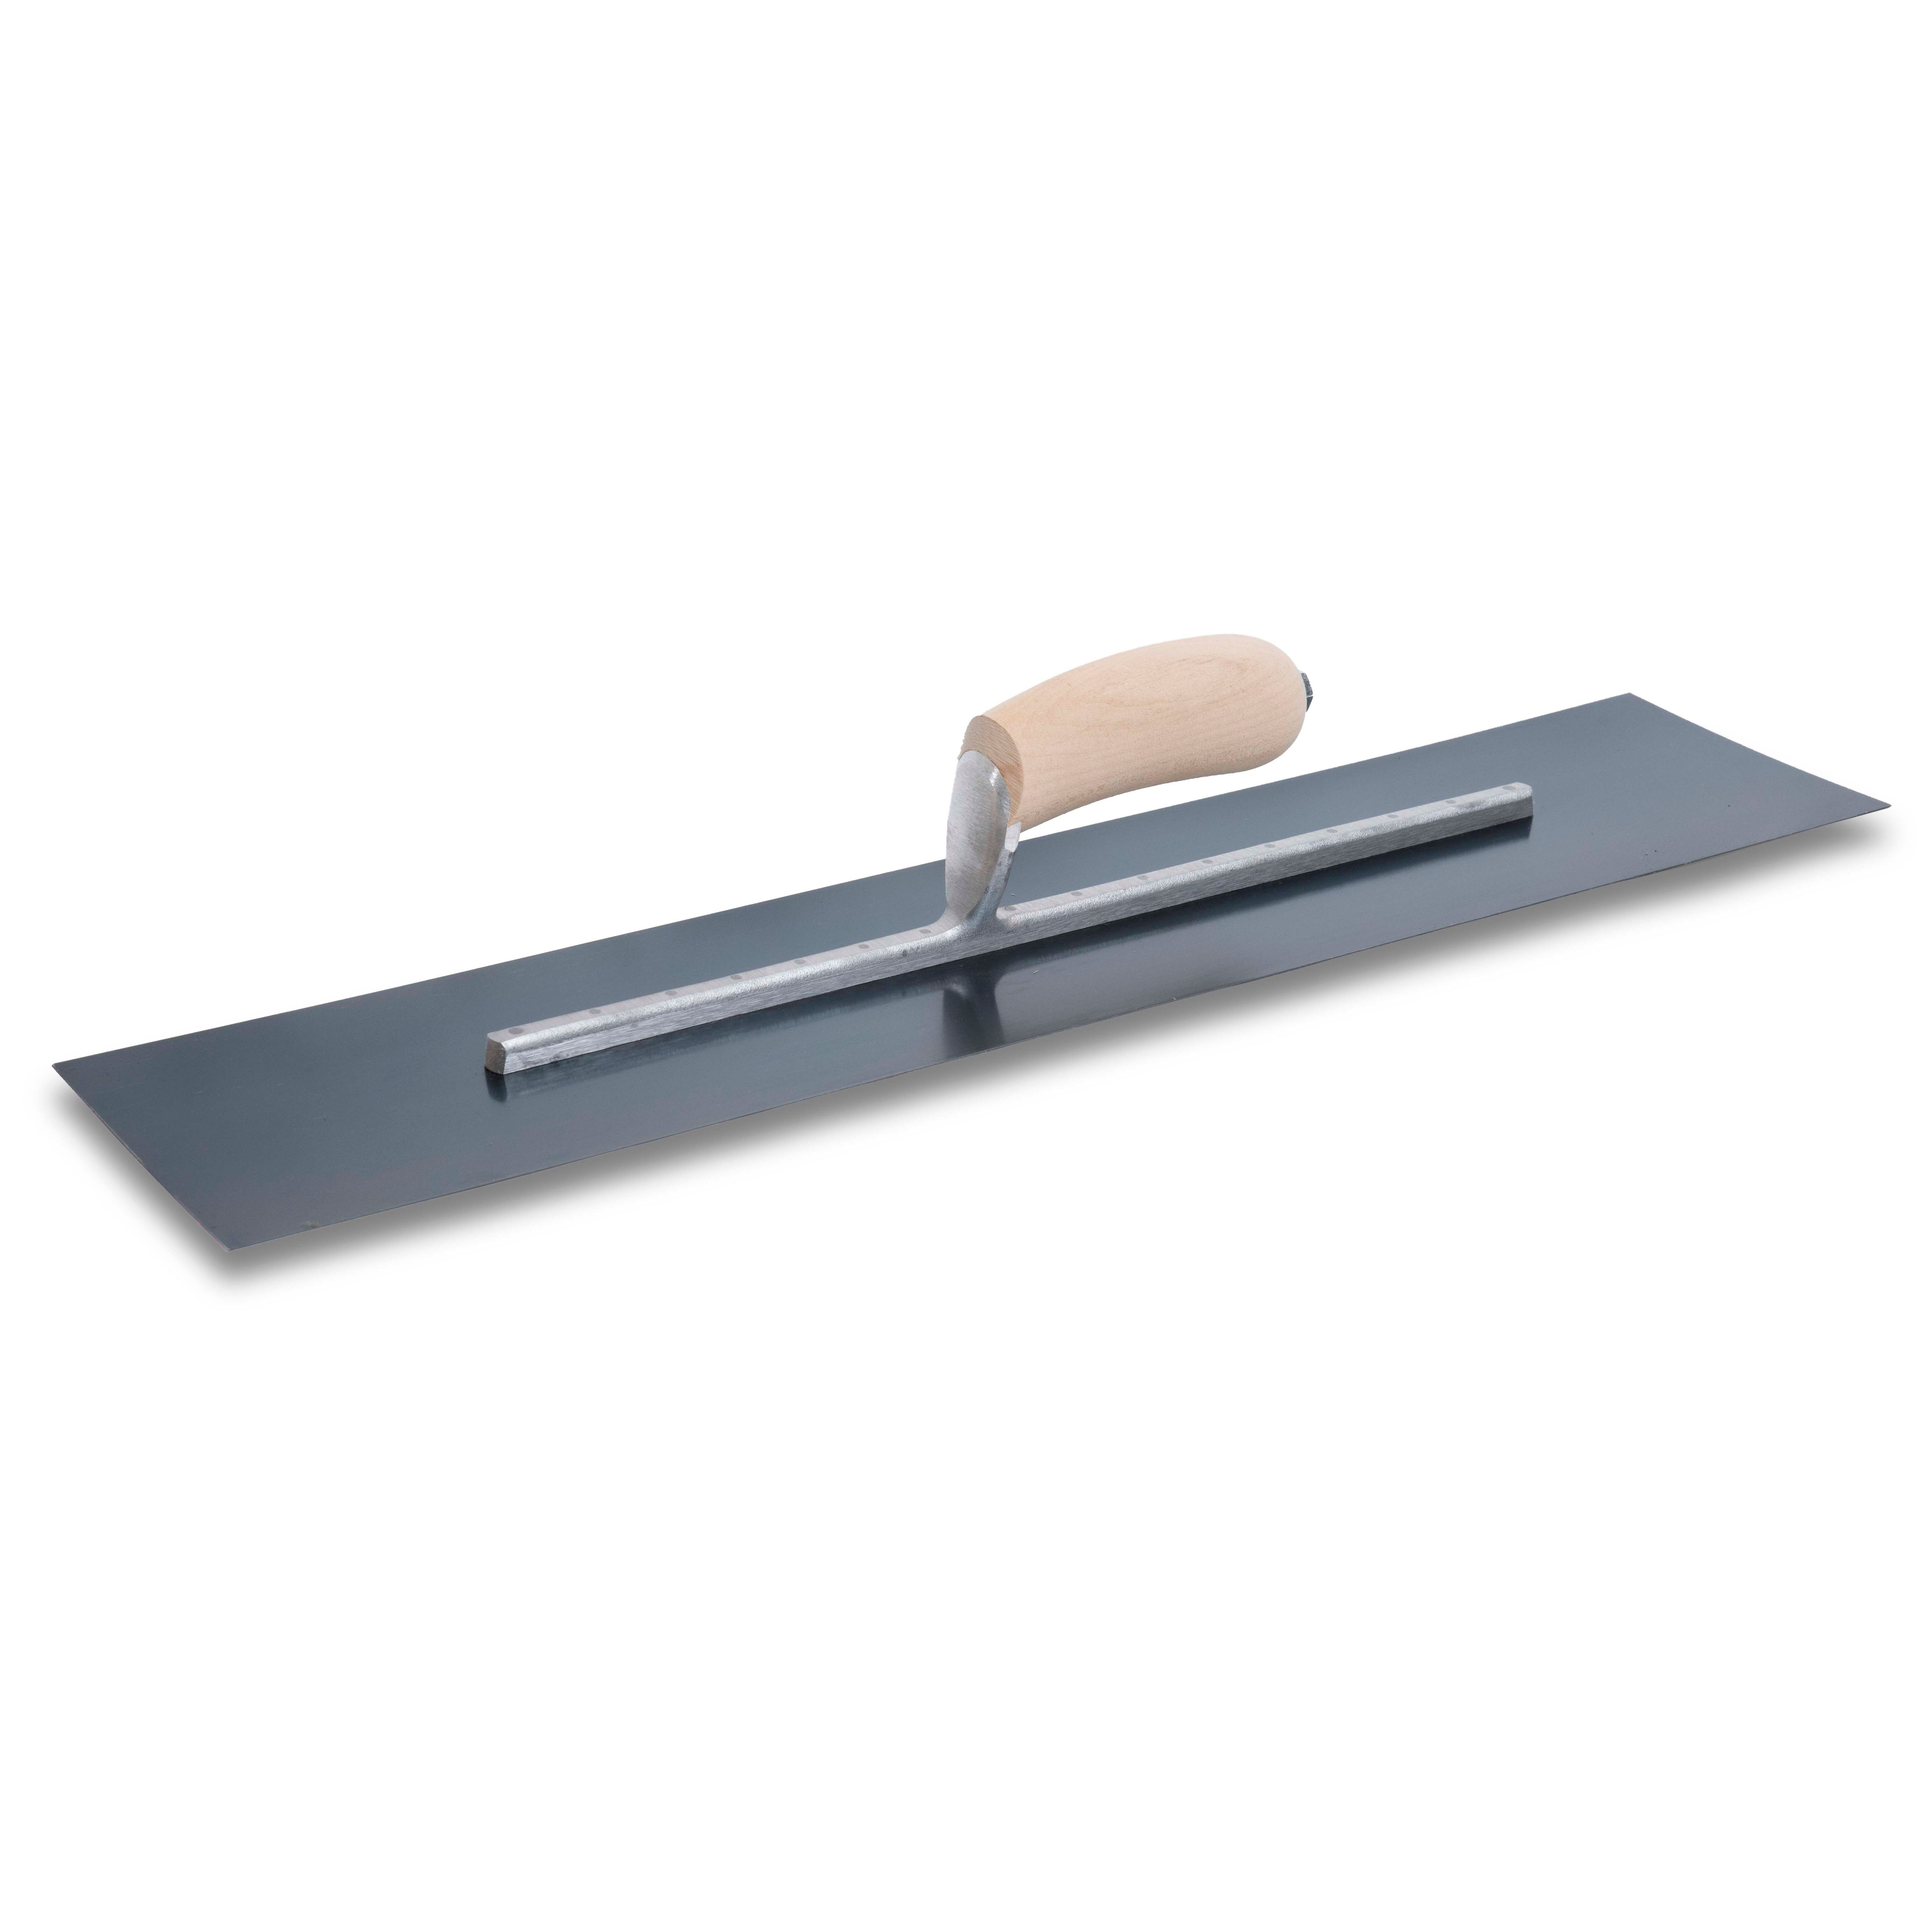 Marshalltown MXS245B 24in x 5in Blue Steel Finishing Trowel with Curved Wood Handle MXS245B